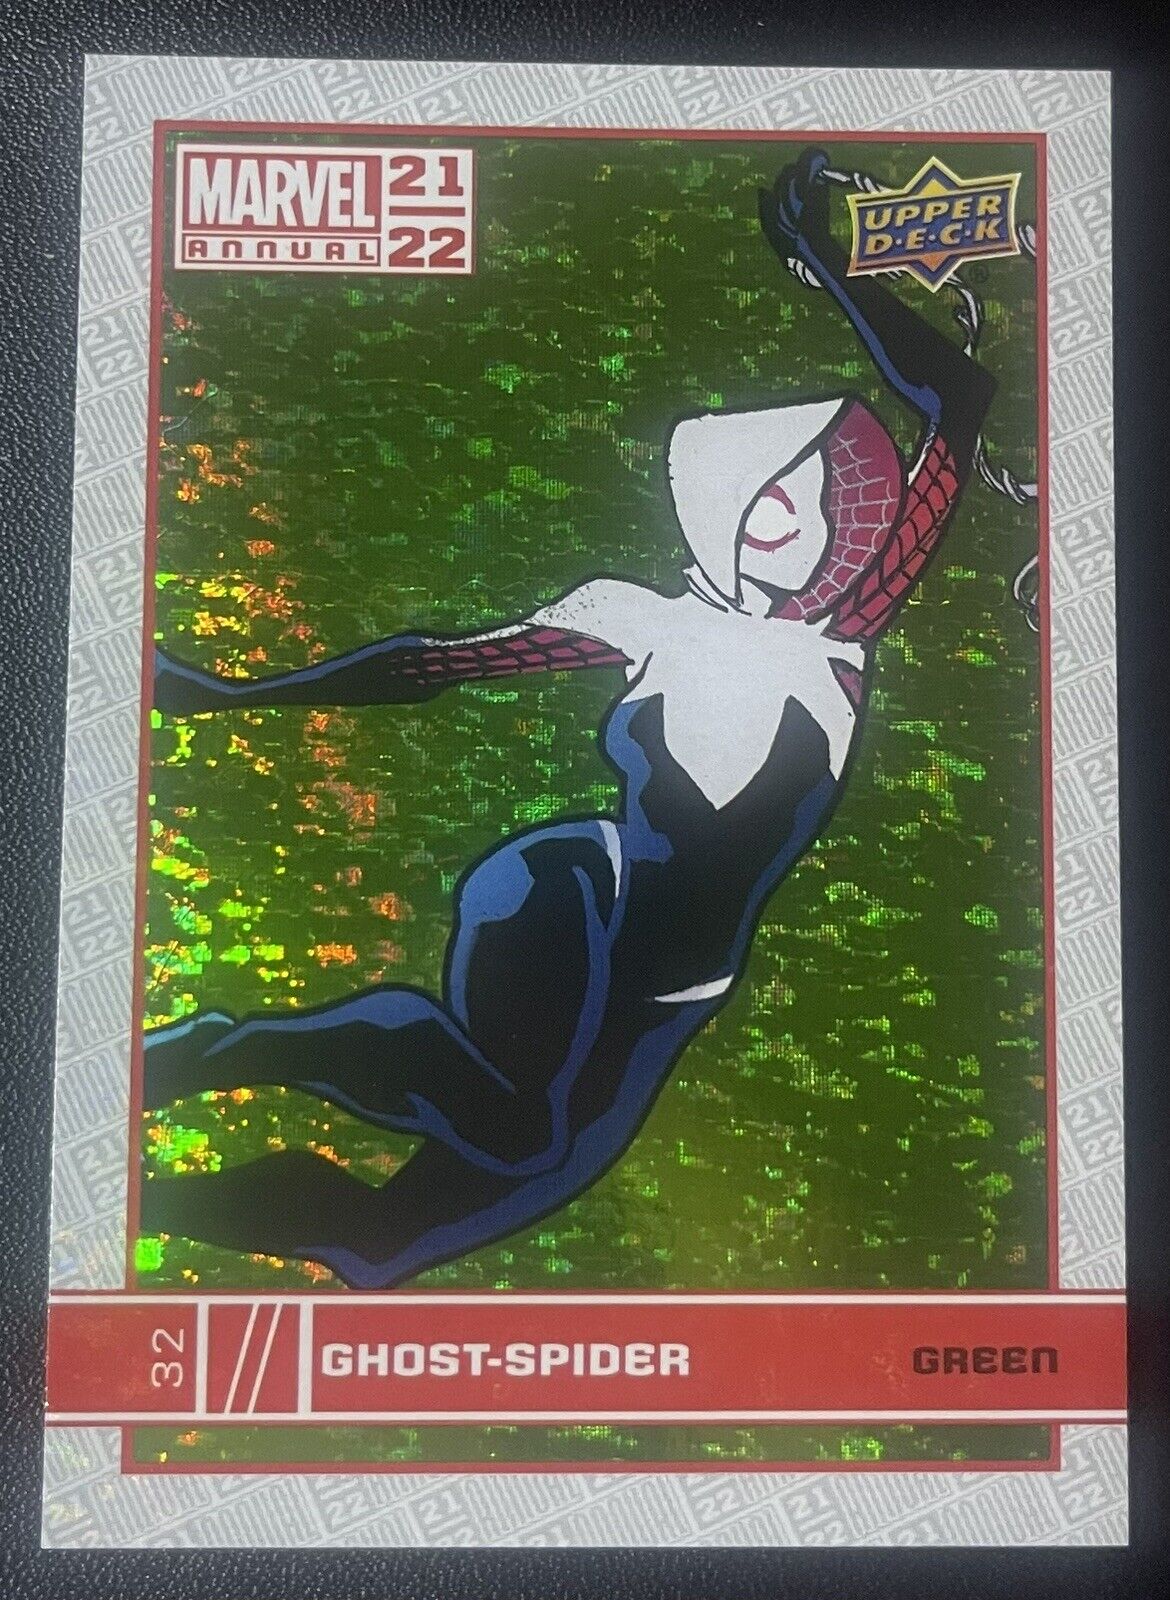 2021-22 Upper Deck Marvel Annual Green Spider-Woman Ghost-Spider #32 0s5r